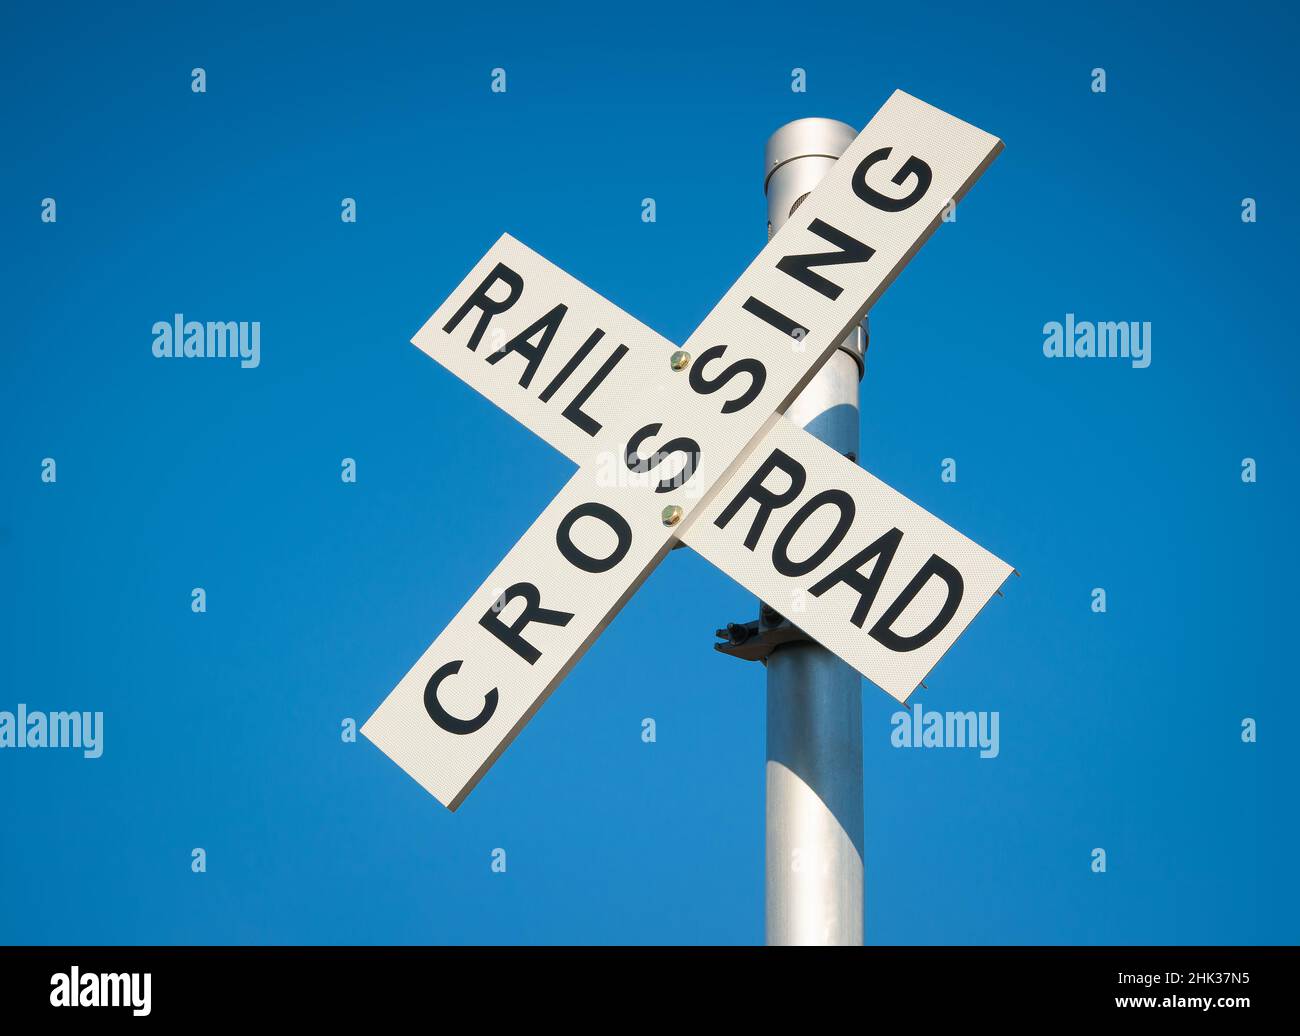 Railroad crossing sign on rural road Stock Photo